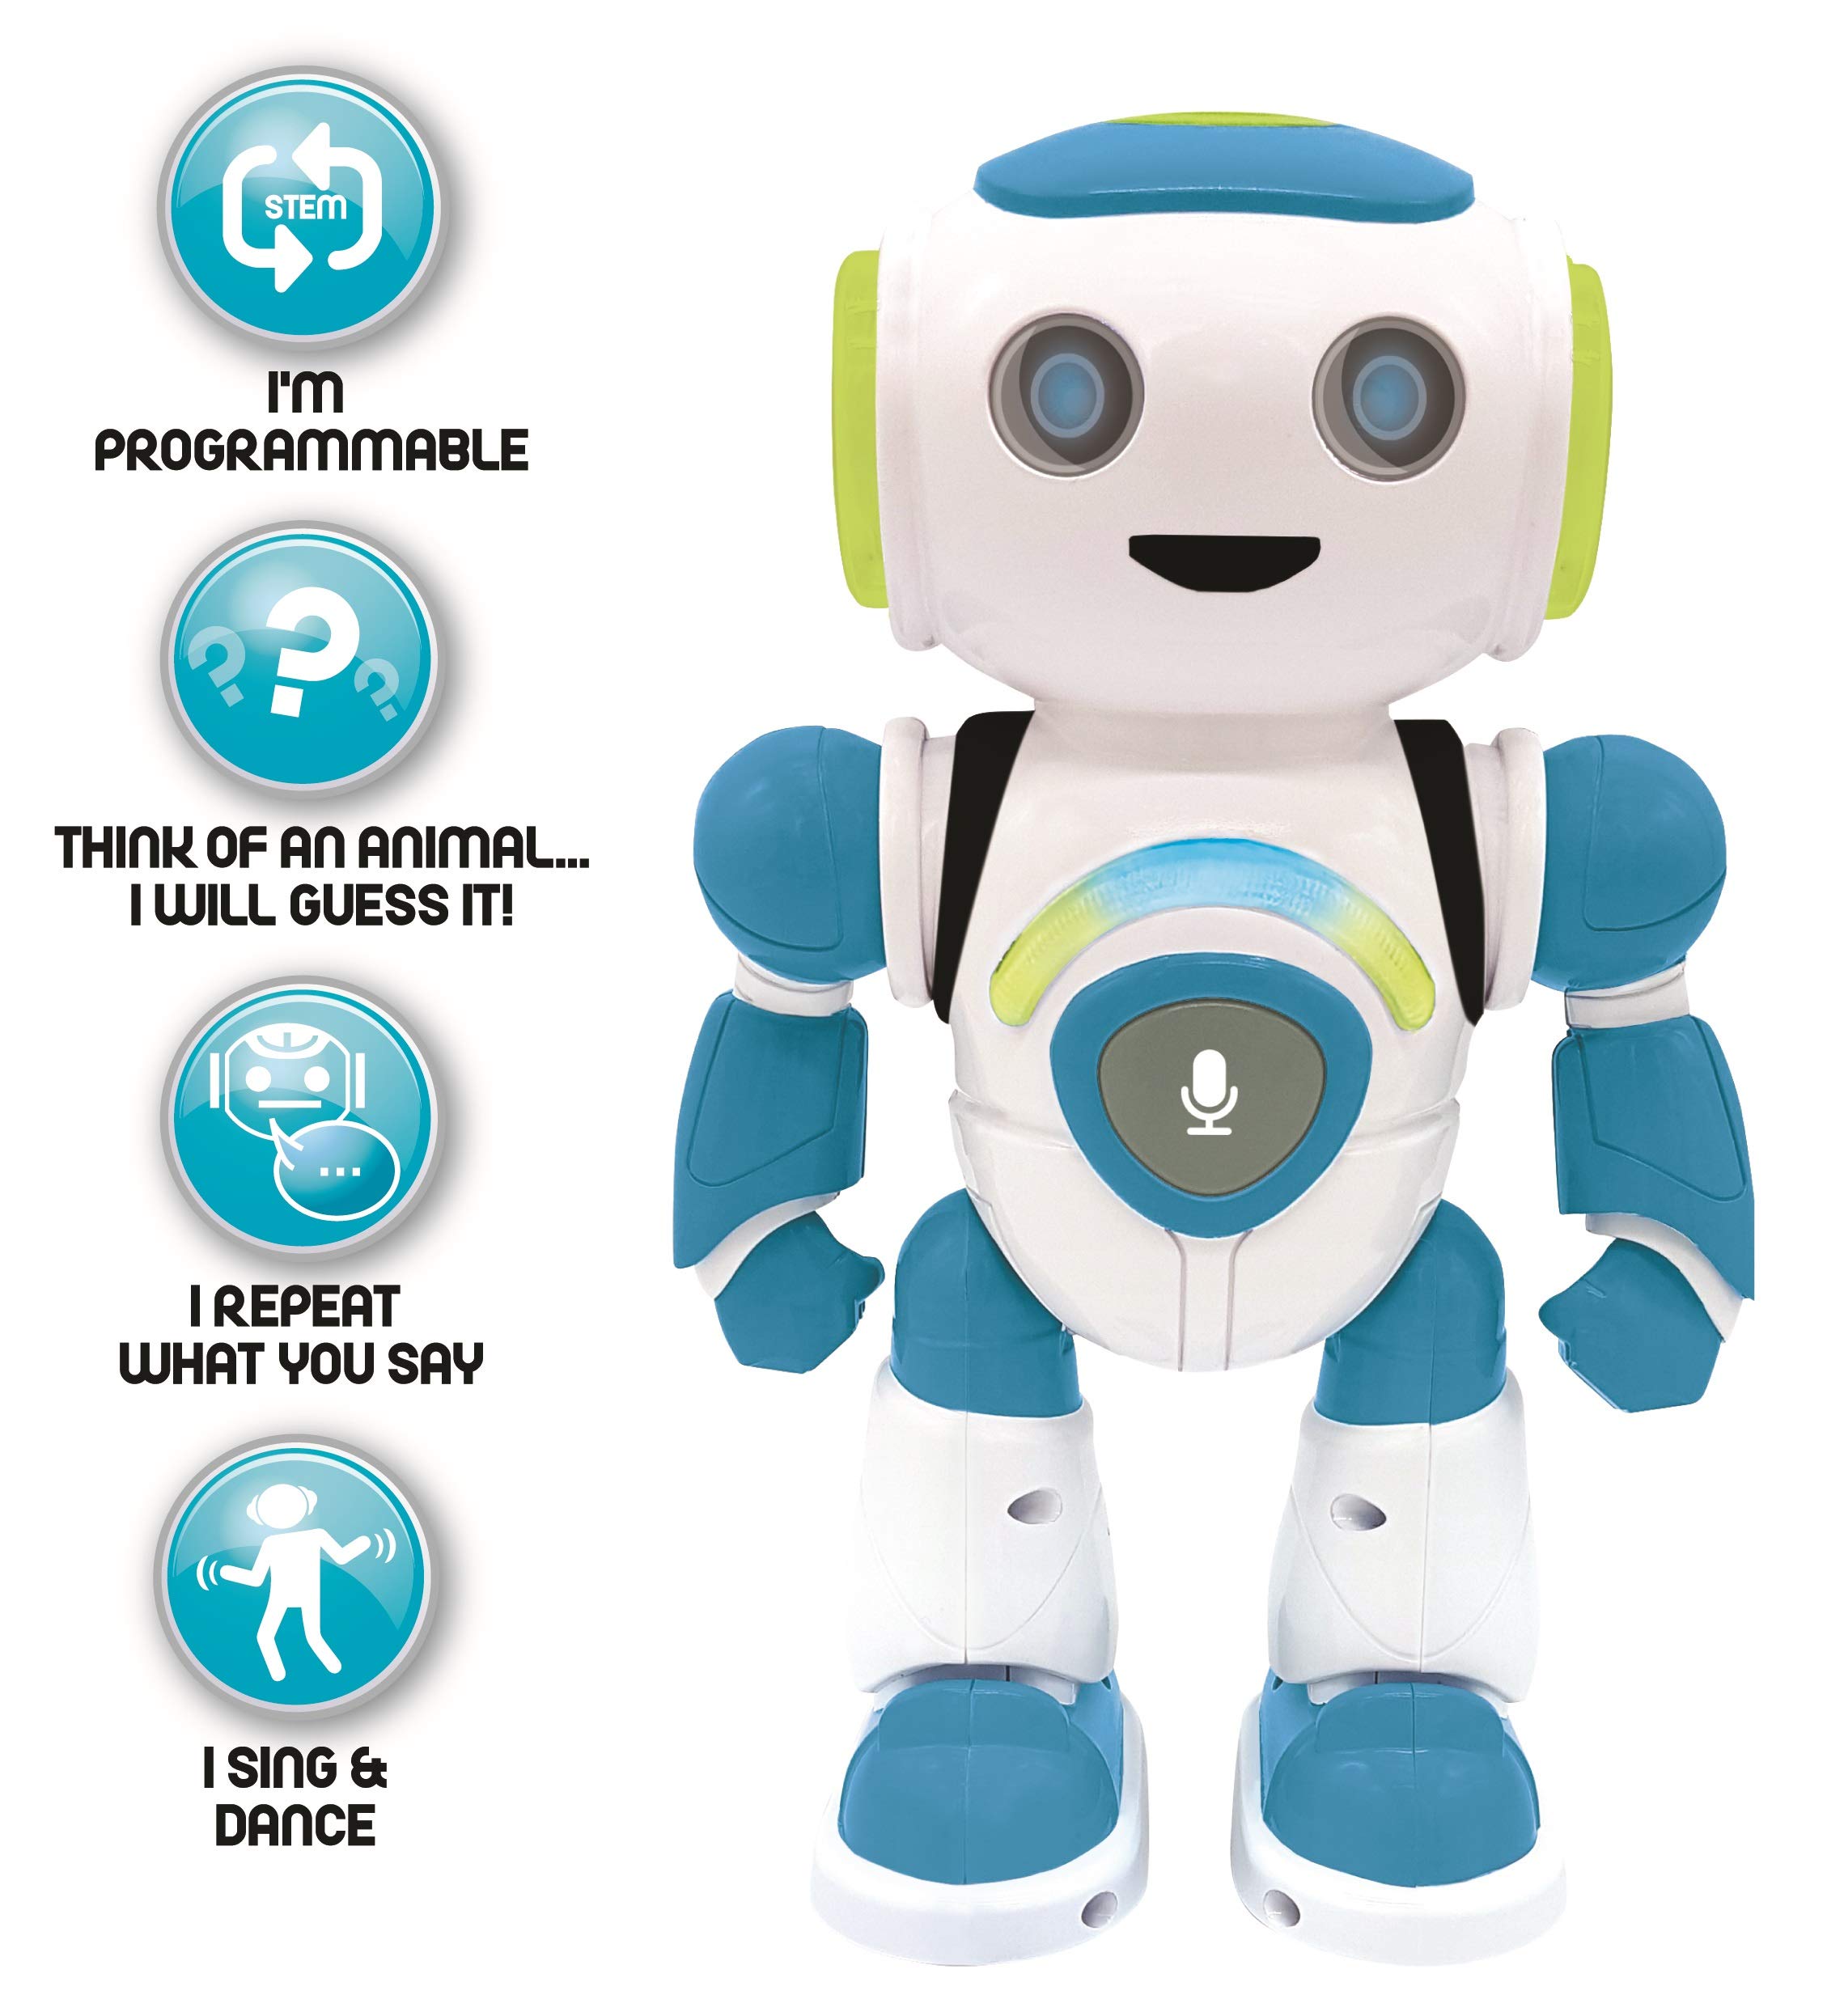 Lexibook - Powerman Jr. Smart Interactive Toy That Reads in The Mind Toy for Kids Dancing Plays Music Animal Quiz STEM Programmable Remote Control Boy Robot Junior Green/Blue - ROB20EN